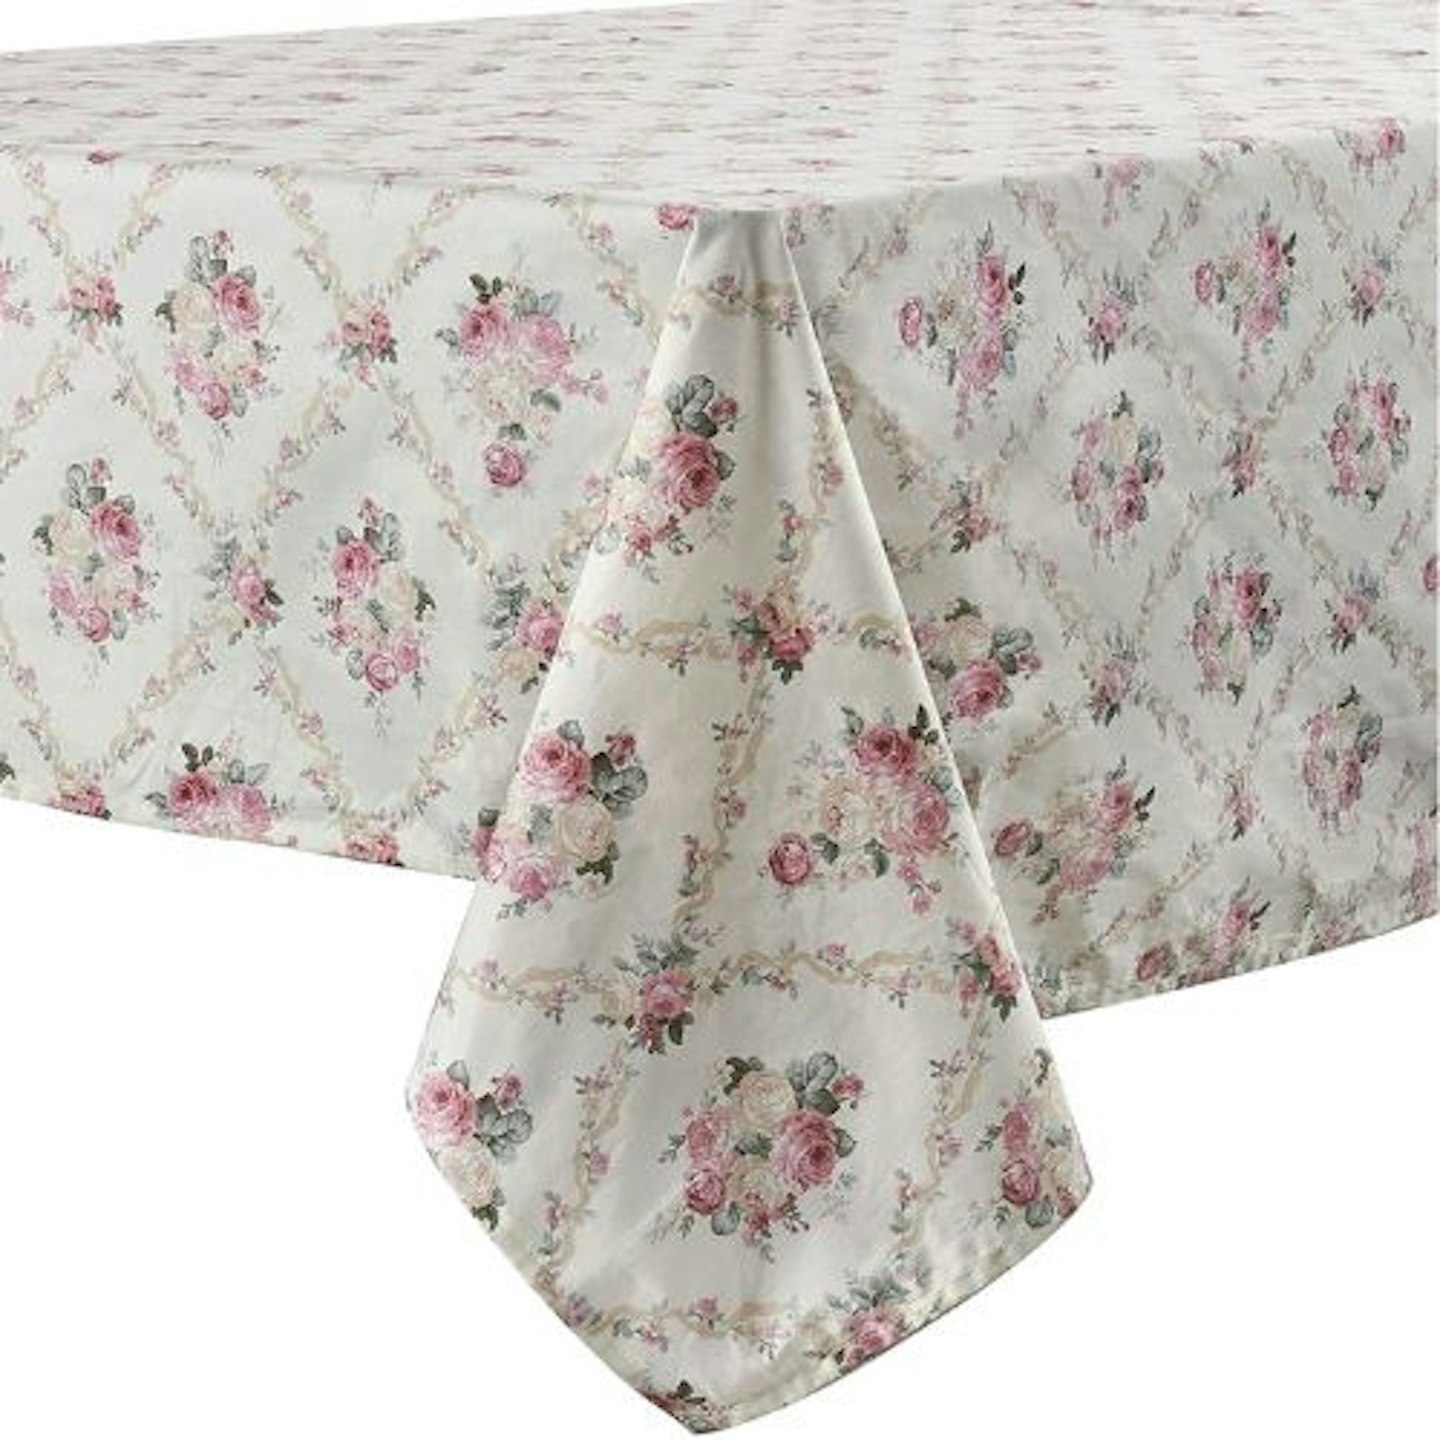 Arquiel Rose Print Tablecloth, Rectangle Spring Floral Table Cloth, Durable Polyester Table Cover for Kitchen Dining Parties, 155x180cm